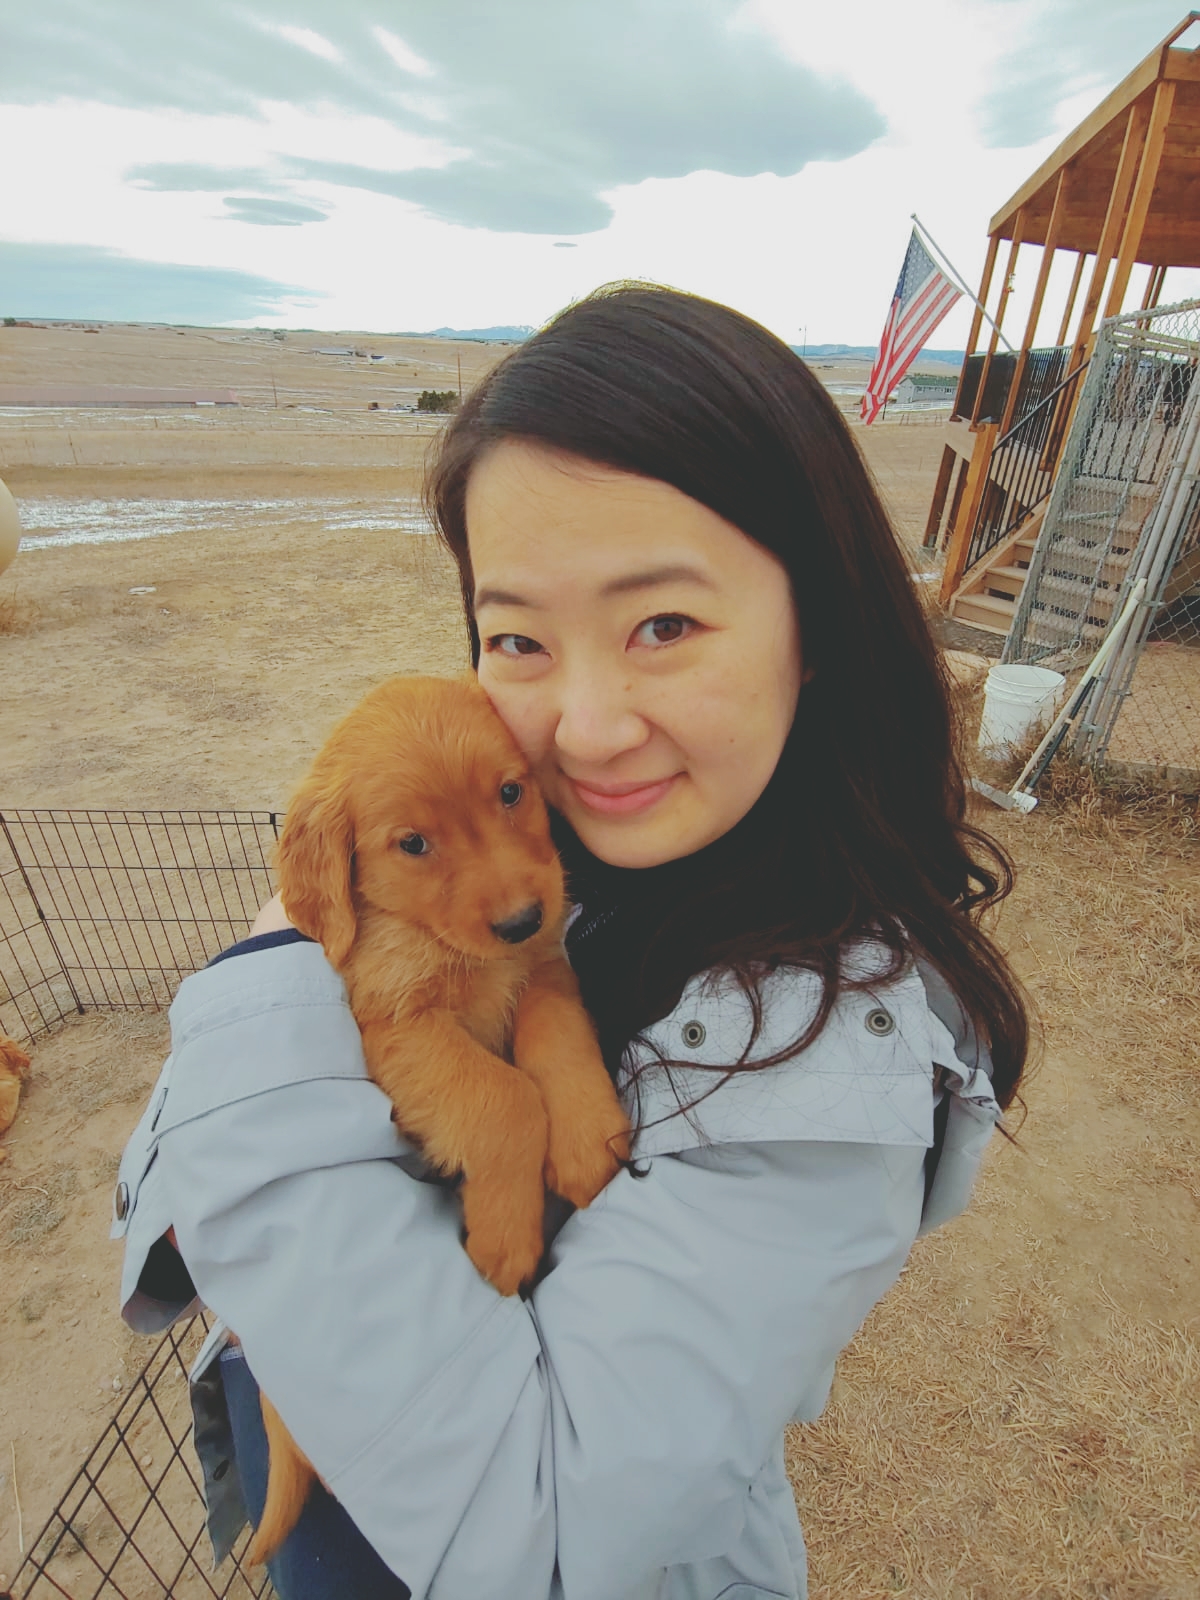 Female holding a puppy